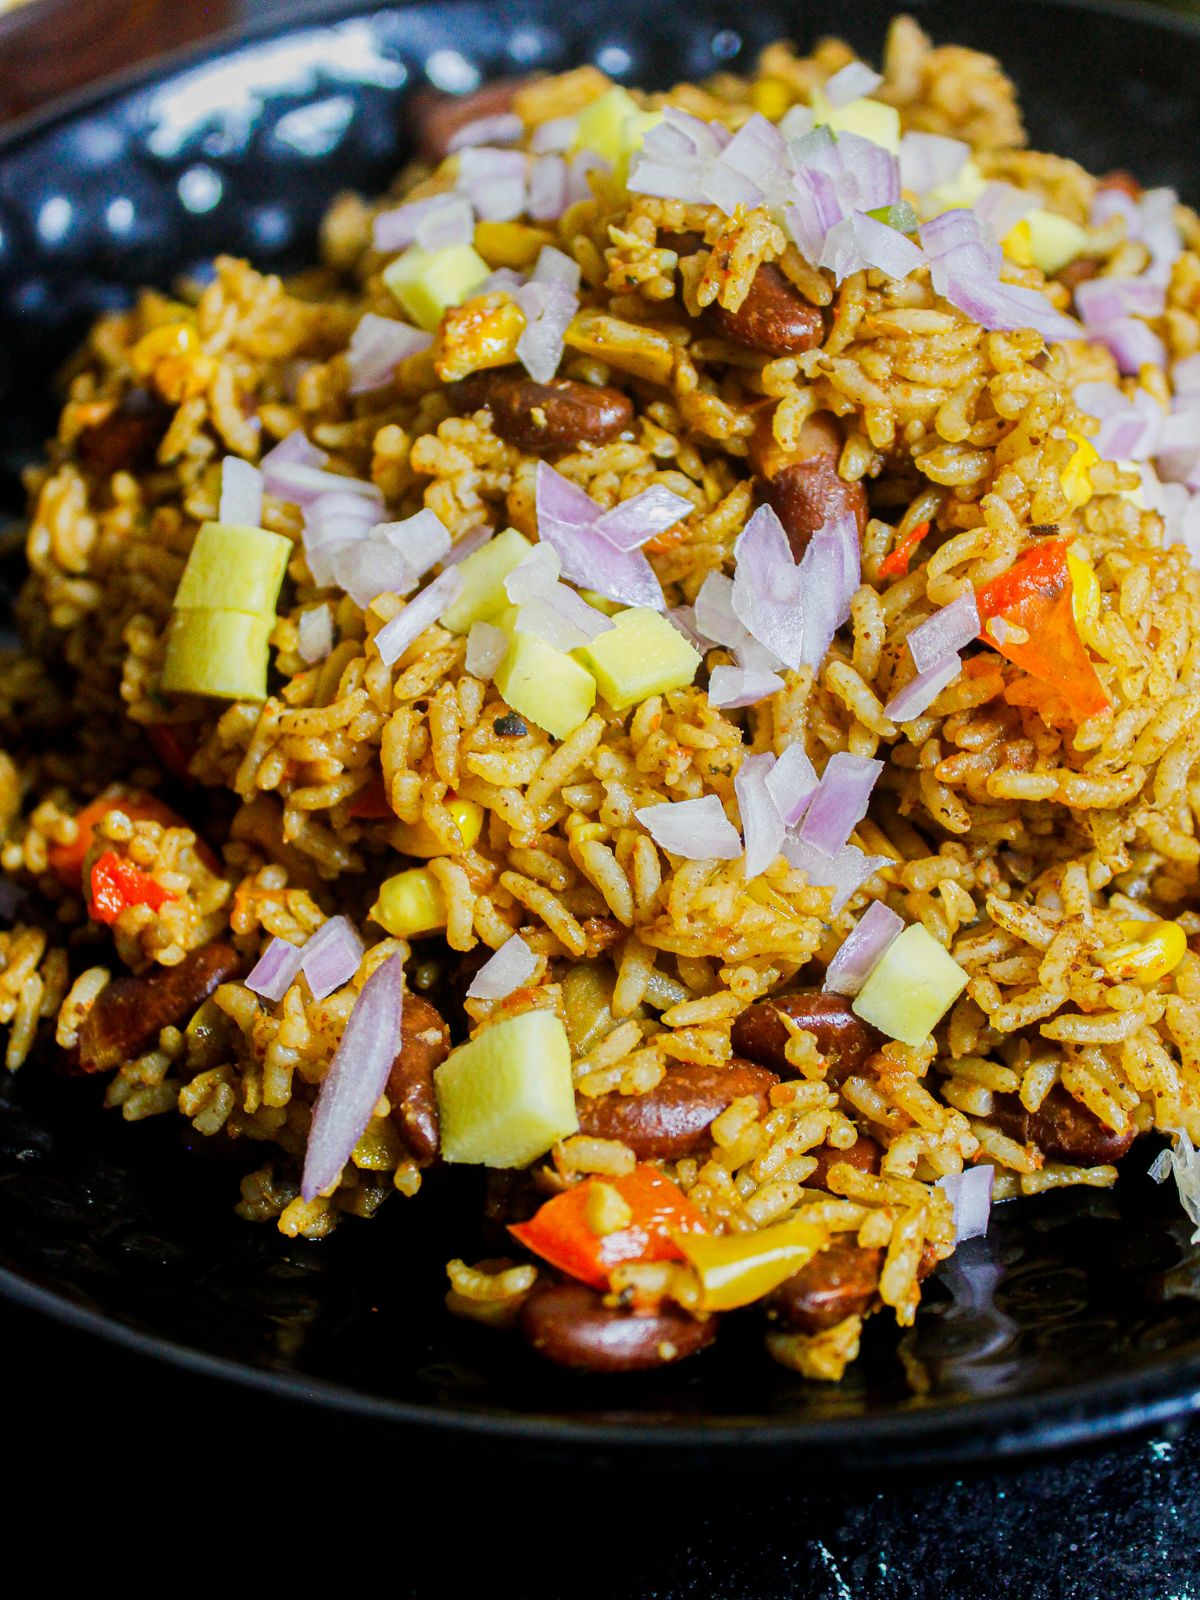 Top view image of Instant Pot Mexican Rice